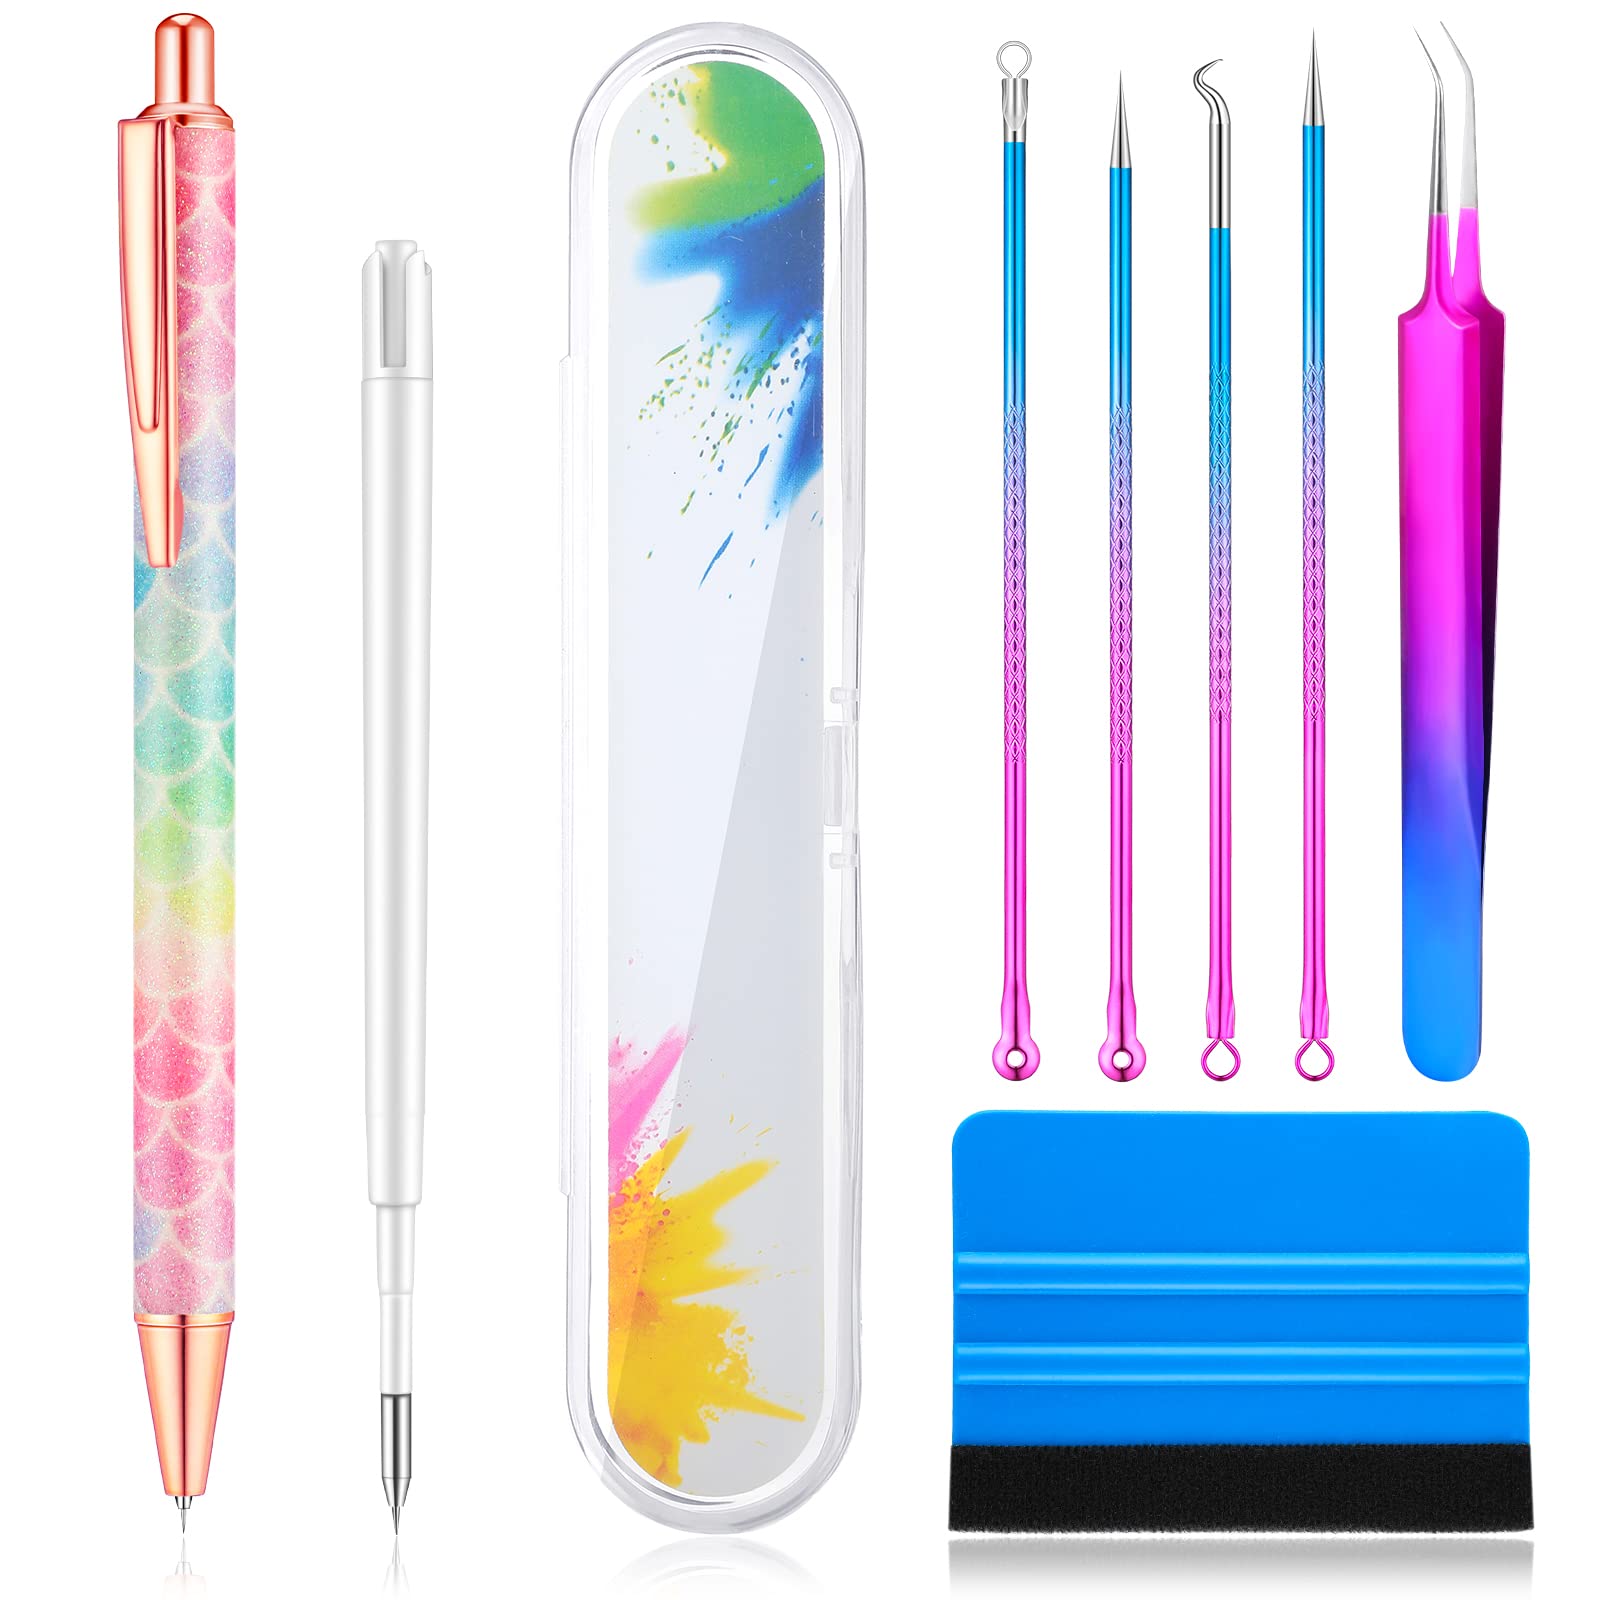 Chumia 8 Pieces Pin Pen Weeding Tool Vinyl Weeding Tool With Rainbow  Retractable Air Release Pen And Refill Vinyl Squeegee Vinyl Tweeze